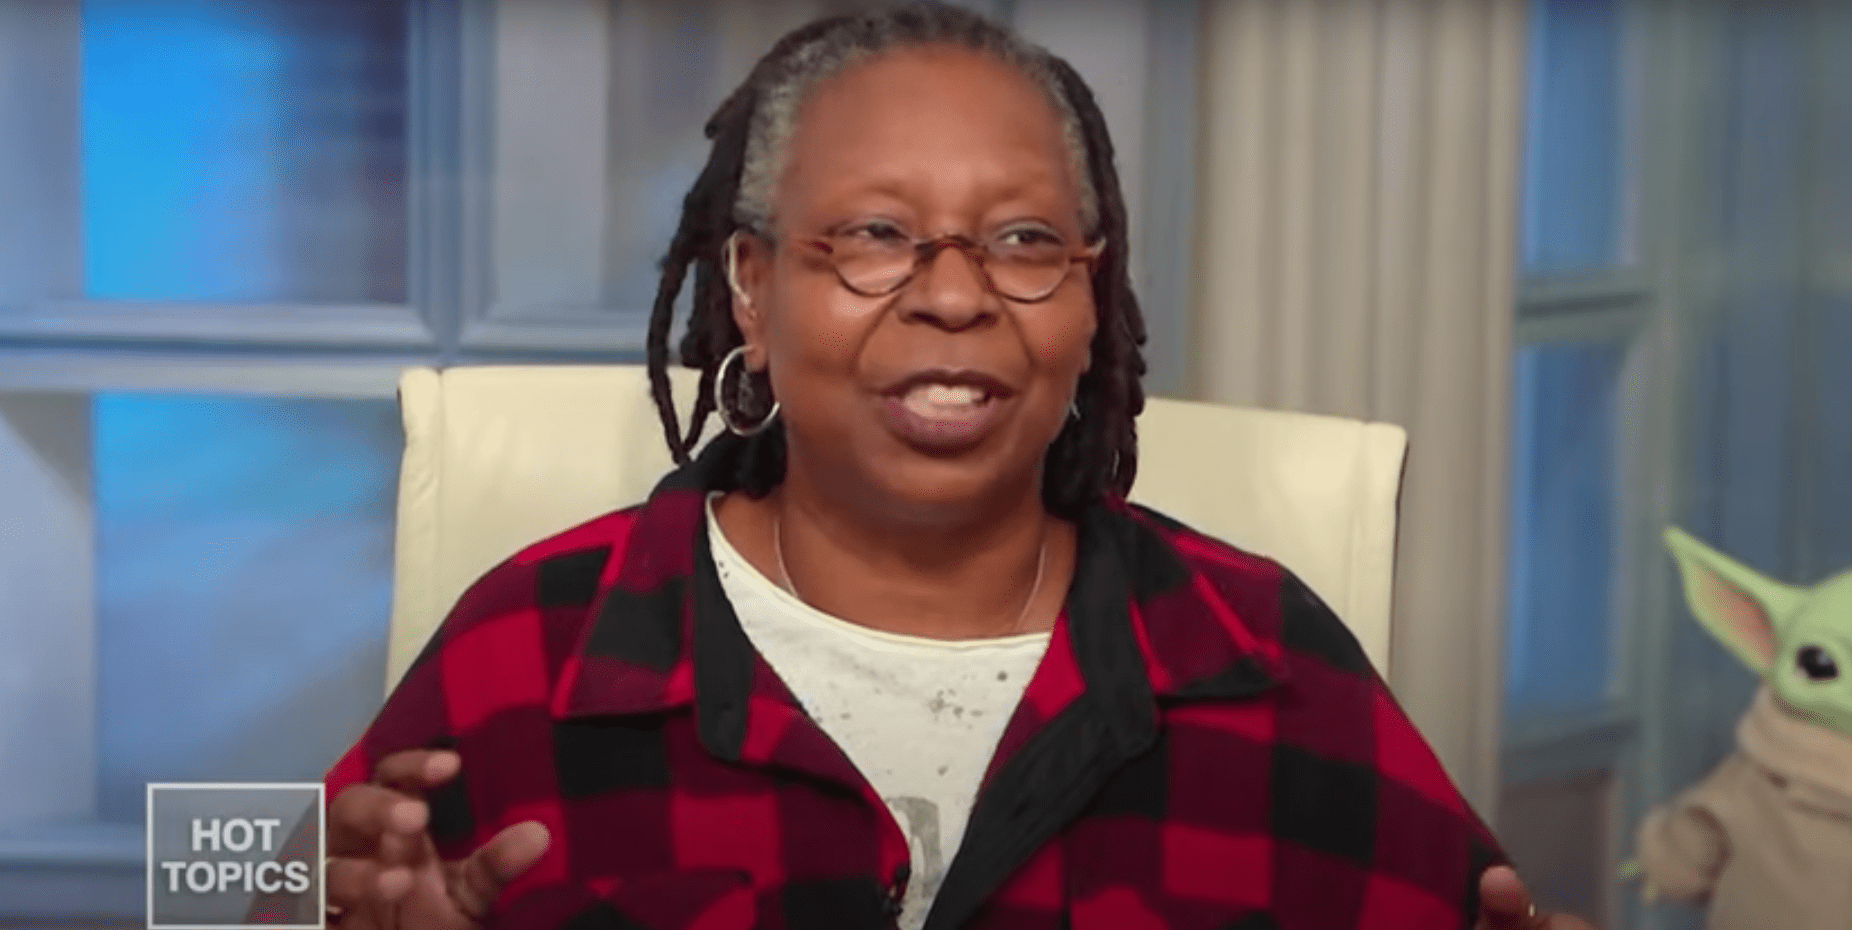 Whoopi Goldberg on The View May 8th 2020| Youtube: The View